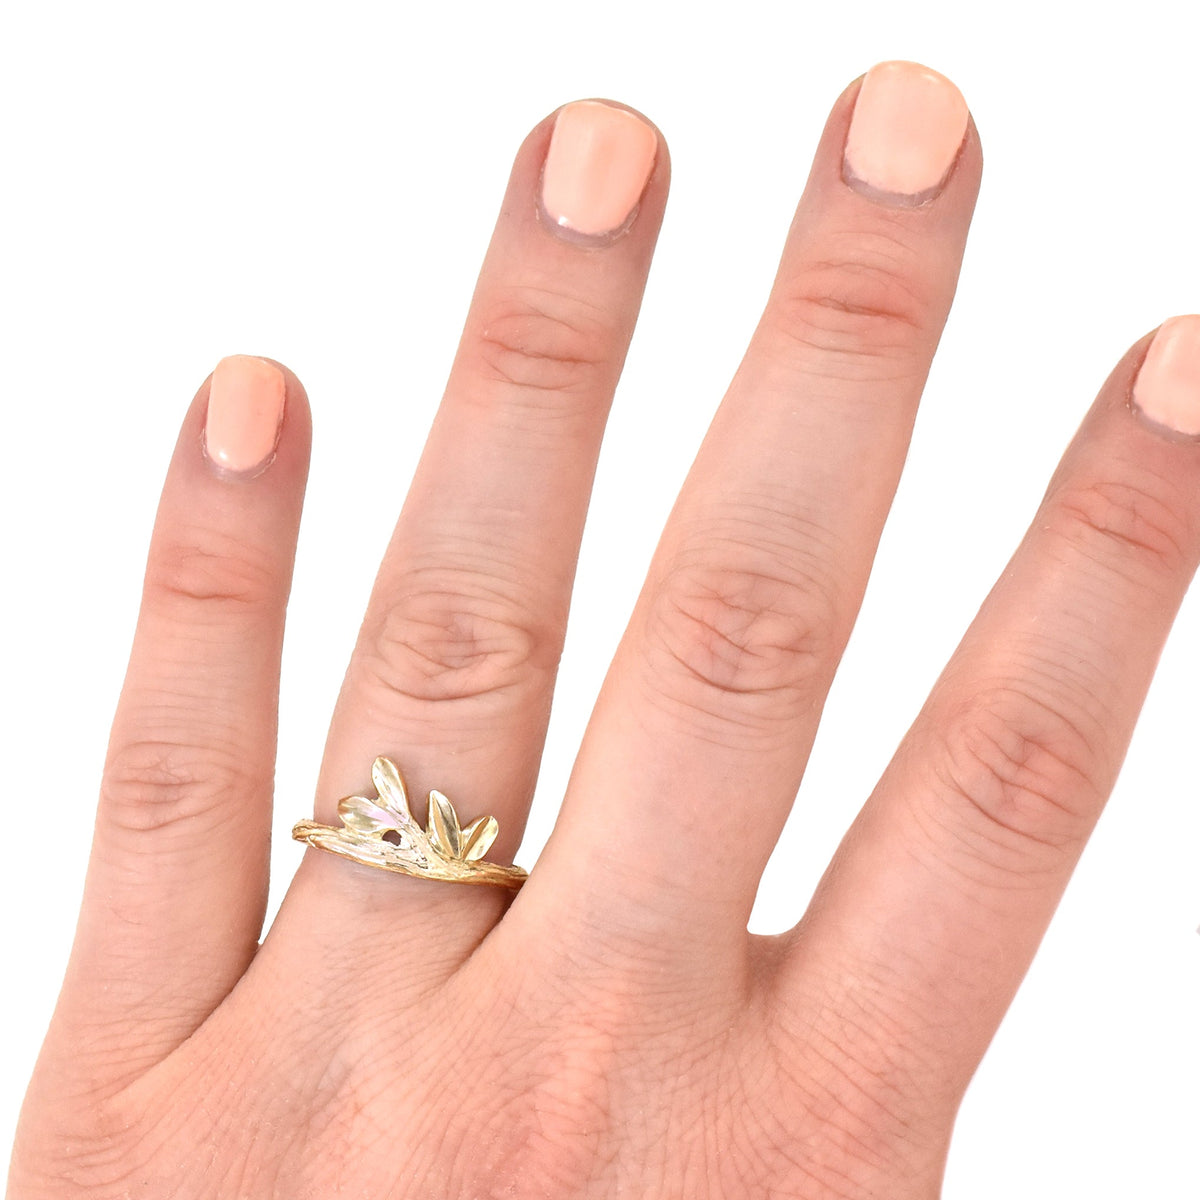 Gold Growing Love Twig Ring - your choice of gold - Wedding Ring 14K Yellow Gold 18K Palladium White Gold 6355 - handmade by Beth Millner Jewelry